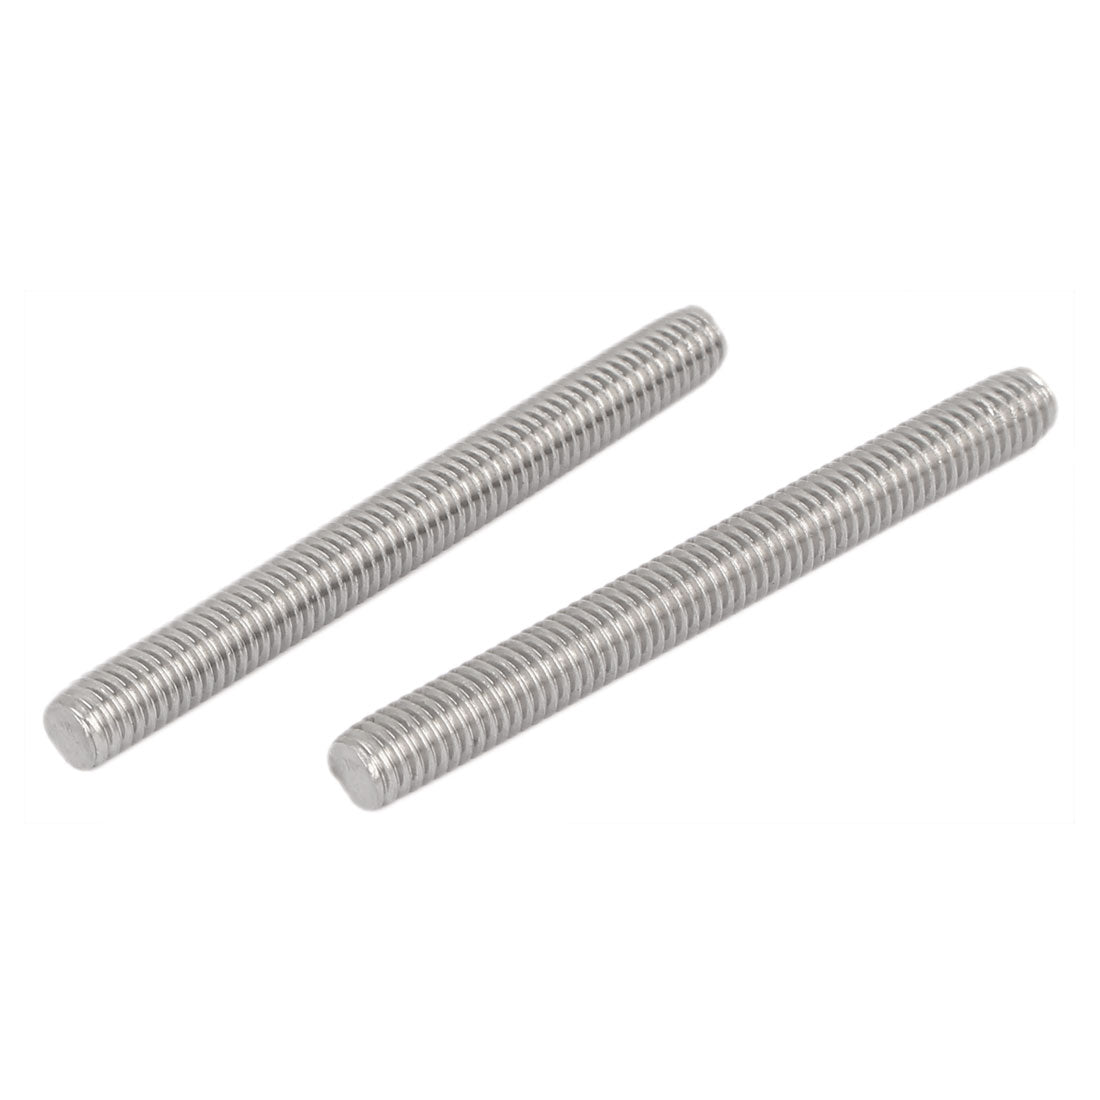 uxcell Uxcell M6 x 60mm 304 Stainless Steel Fully Threaded Rod Bar Studs Hardware 10 Pcs